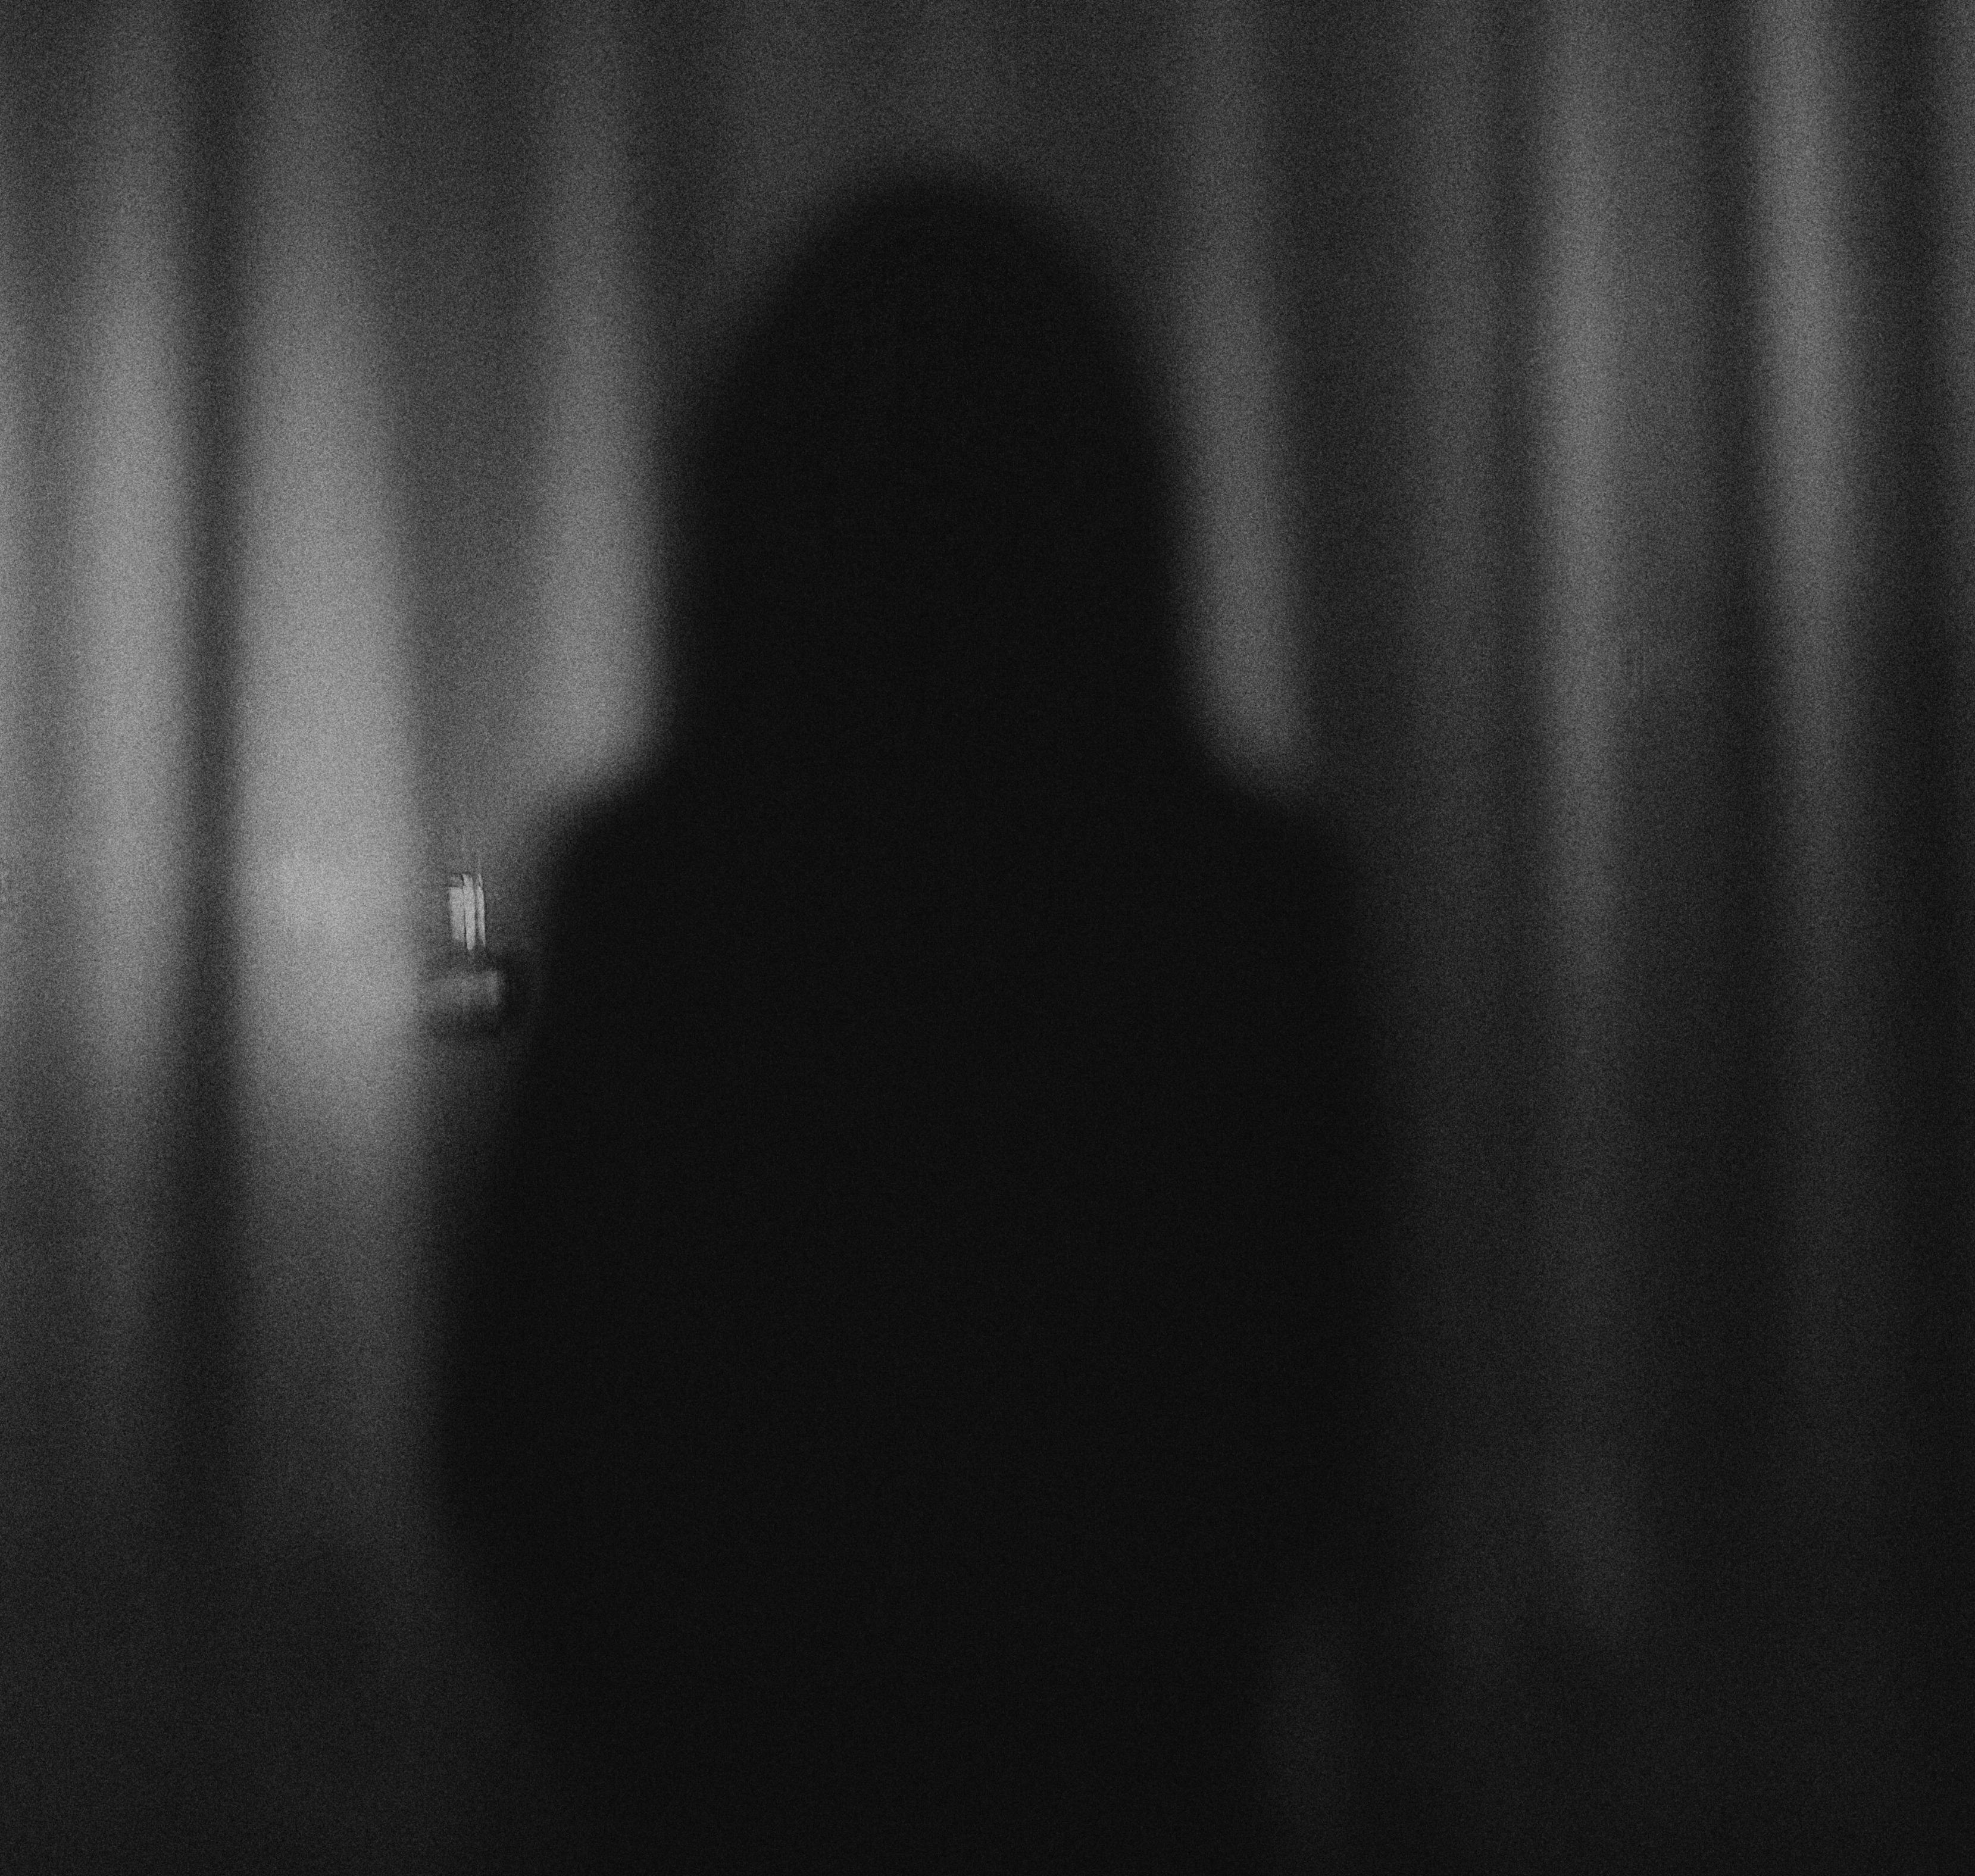 Photo of out-of-focus person standing near a curtain-covered window.